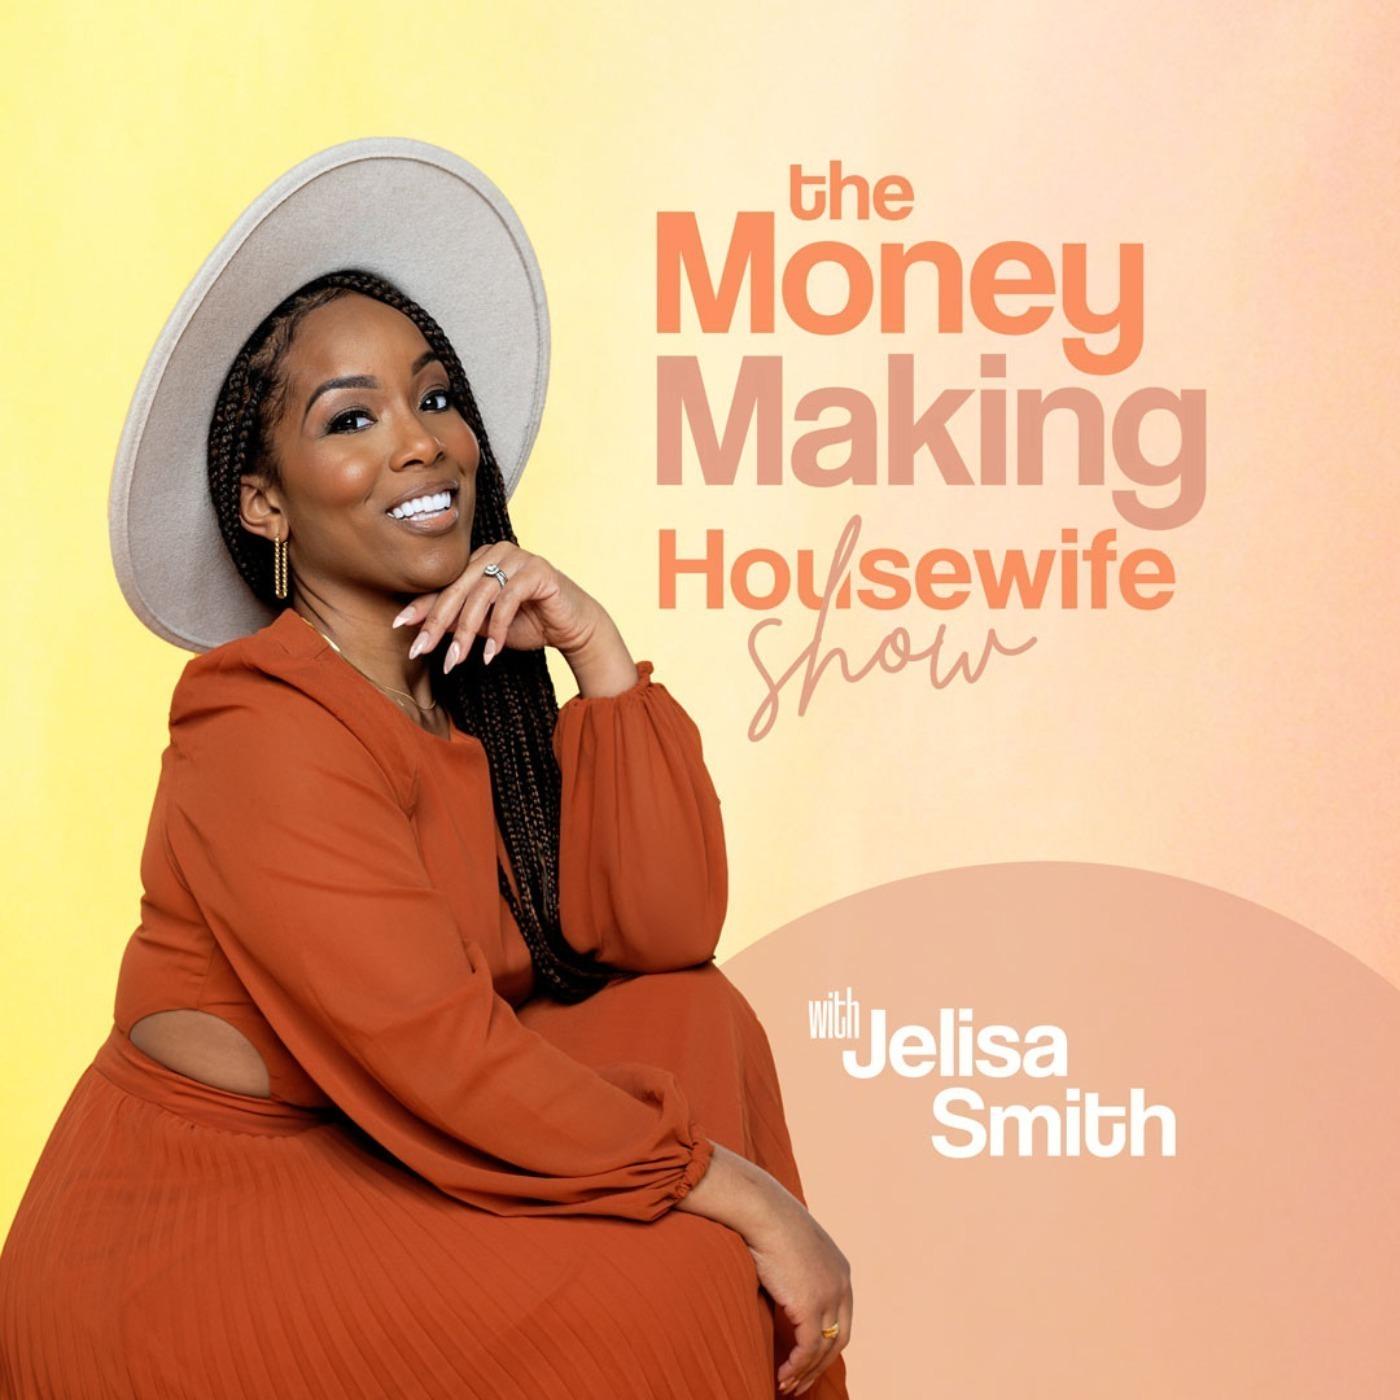 The Money Making Housewife Show